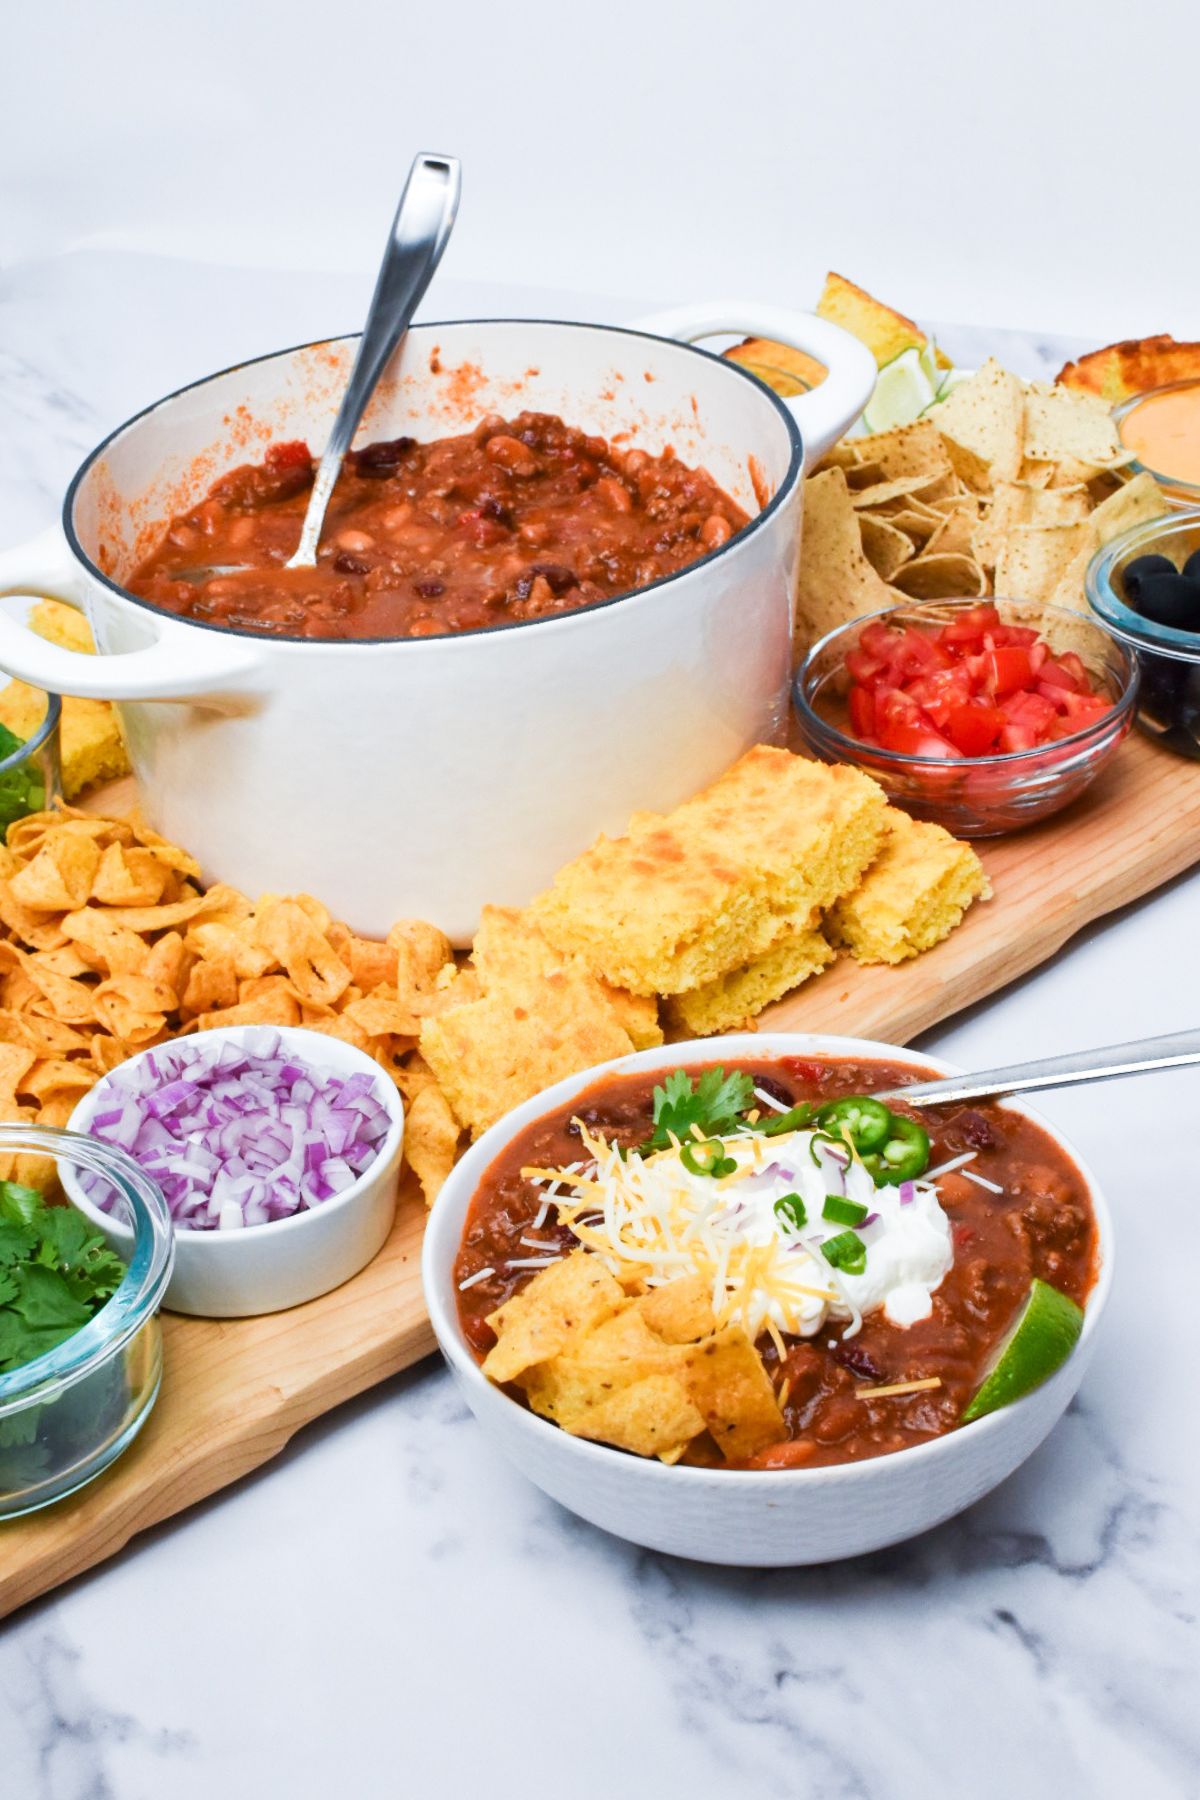 A bowl of chili and a wooden board full of toppings for chili.